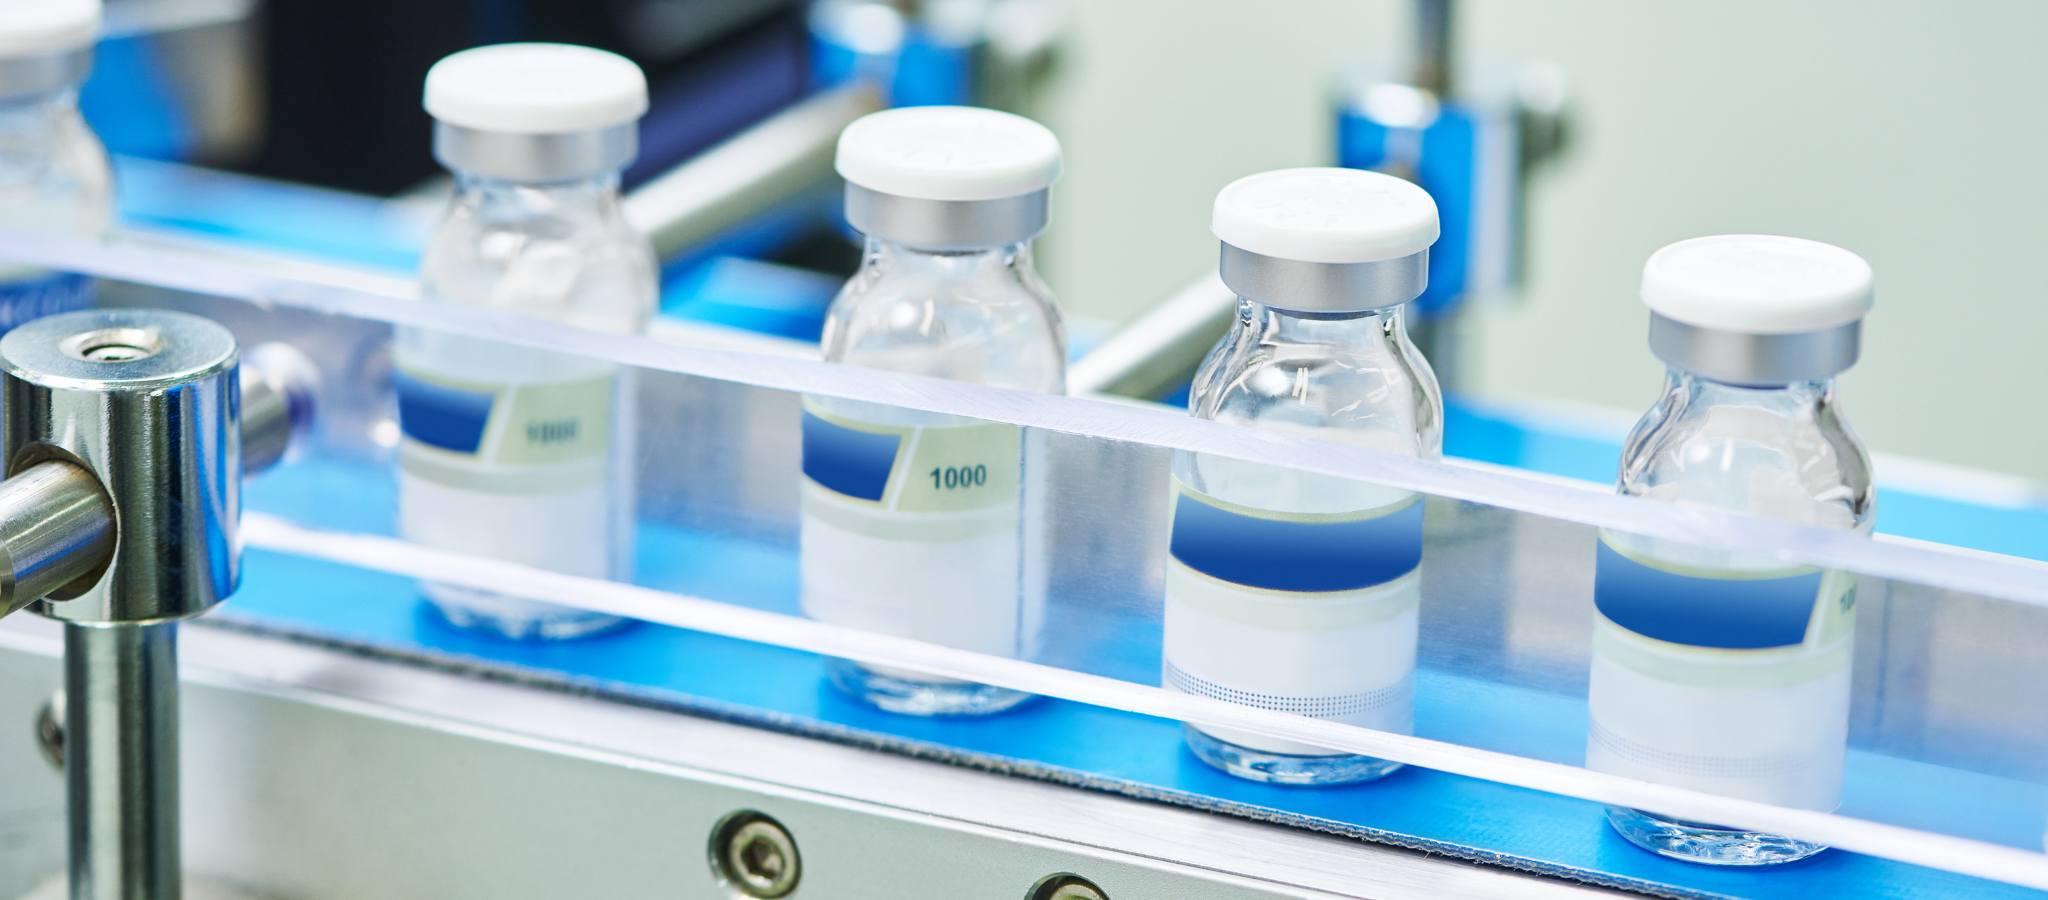 Weighing in Pharmaceutical Laboratories: Compliance and Quality Assurance